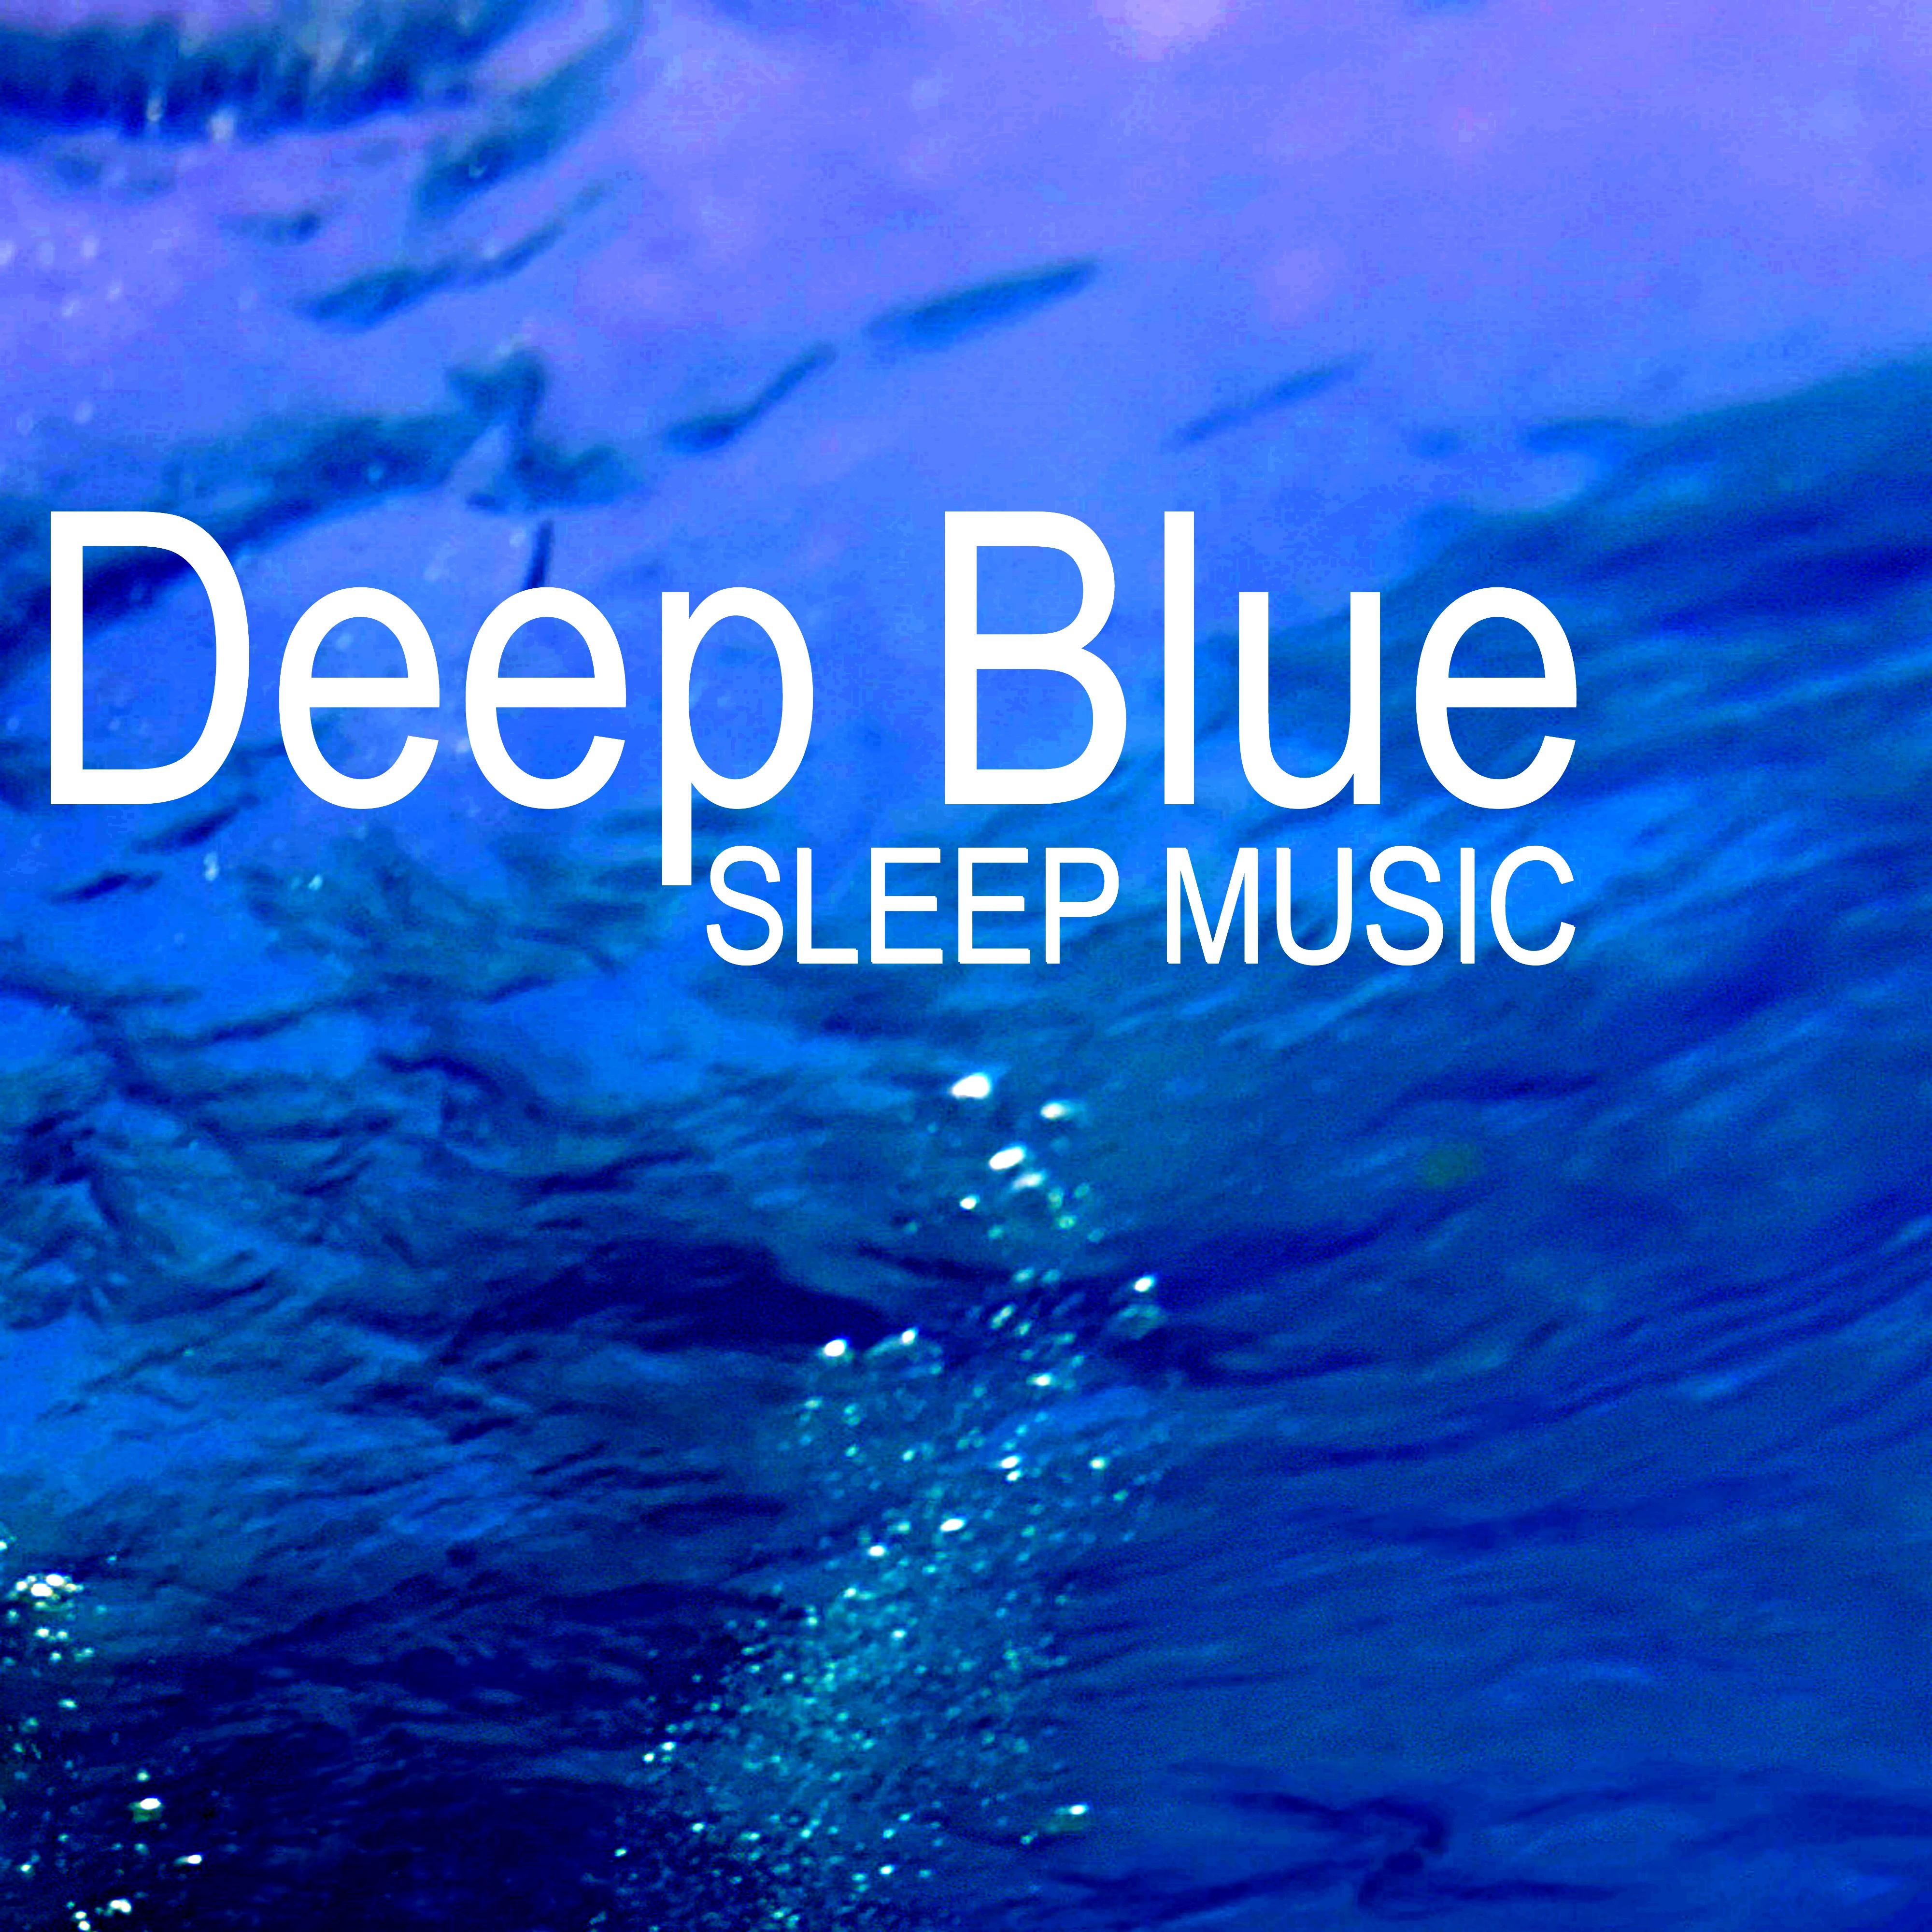 Deep Blue - Music for Healing Relaxation to Help you Sleep, Peaceful Music for Insomnia Aid and Stress Relief, Natural Suonds Sleep Aid with Nature Sound Effects